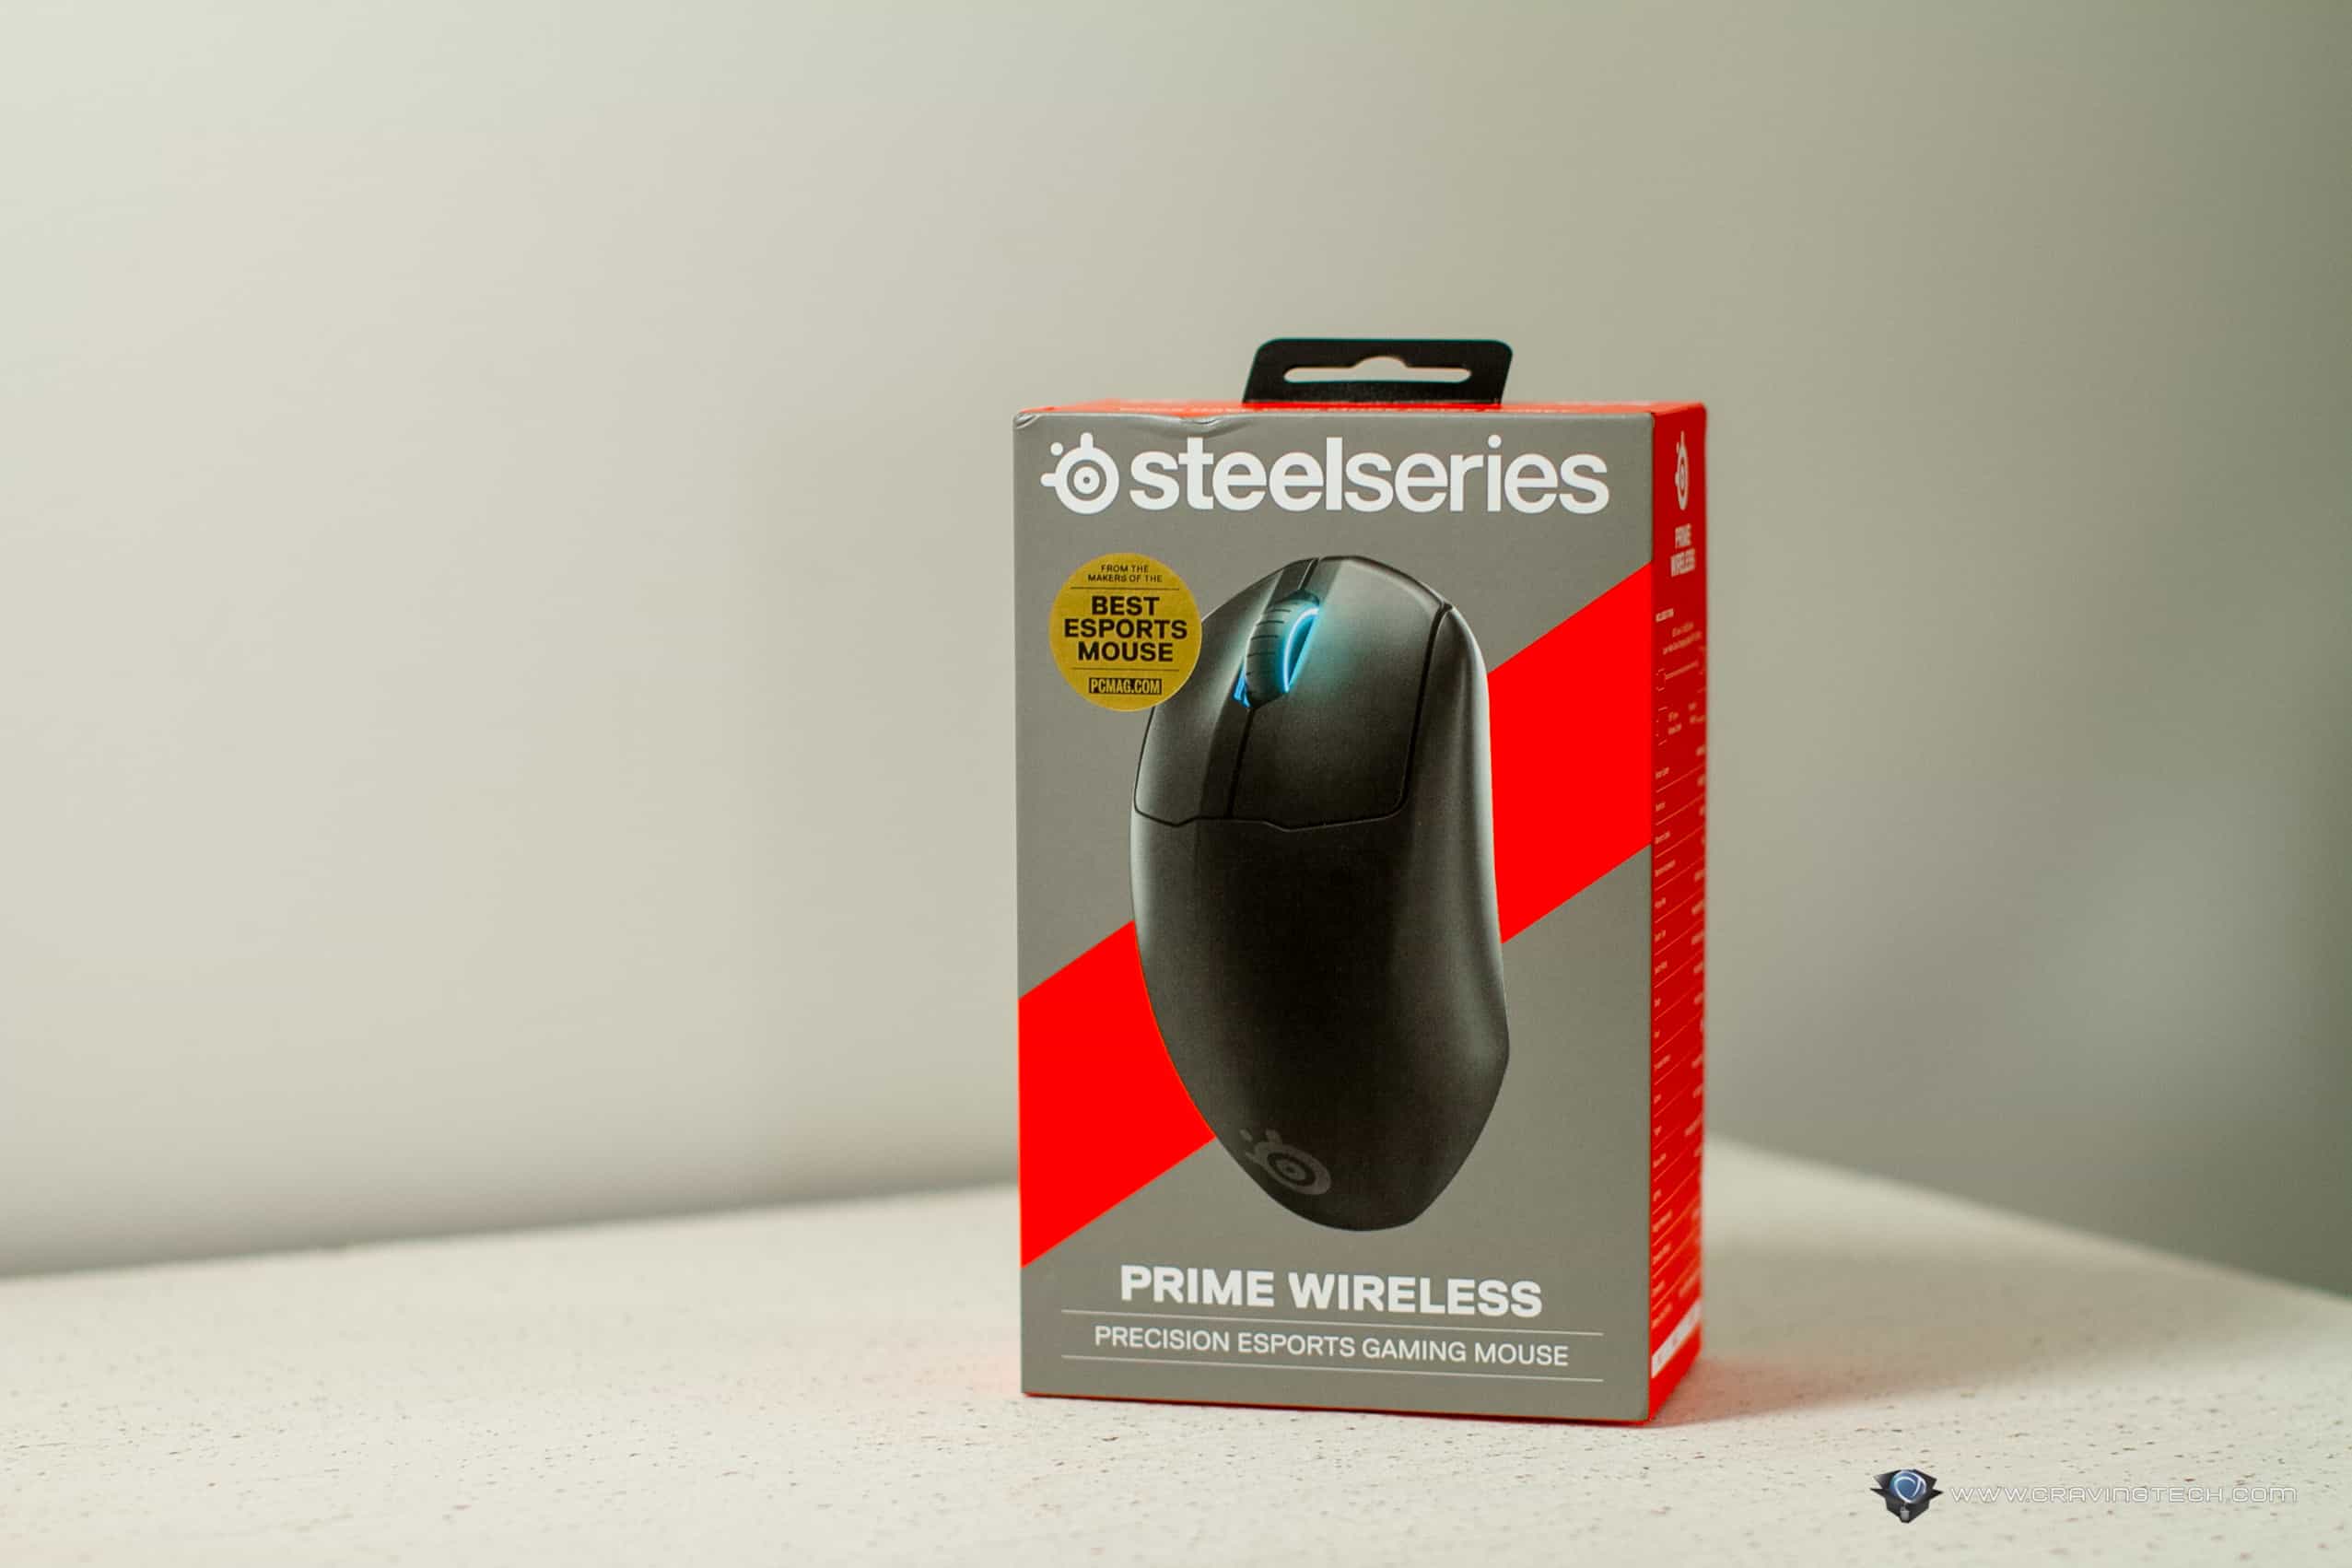 Train your aim with SteelSeries and win a gaming mouse or headset